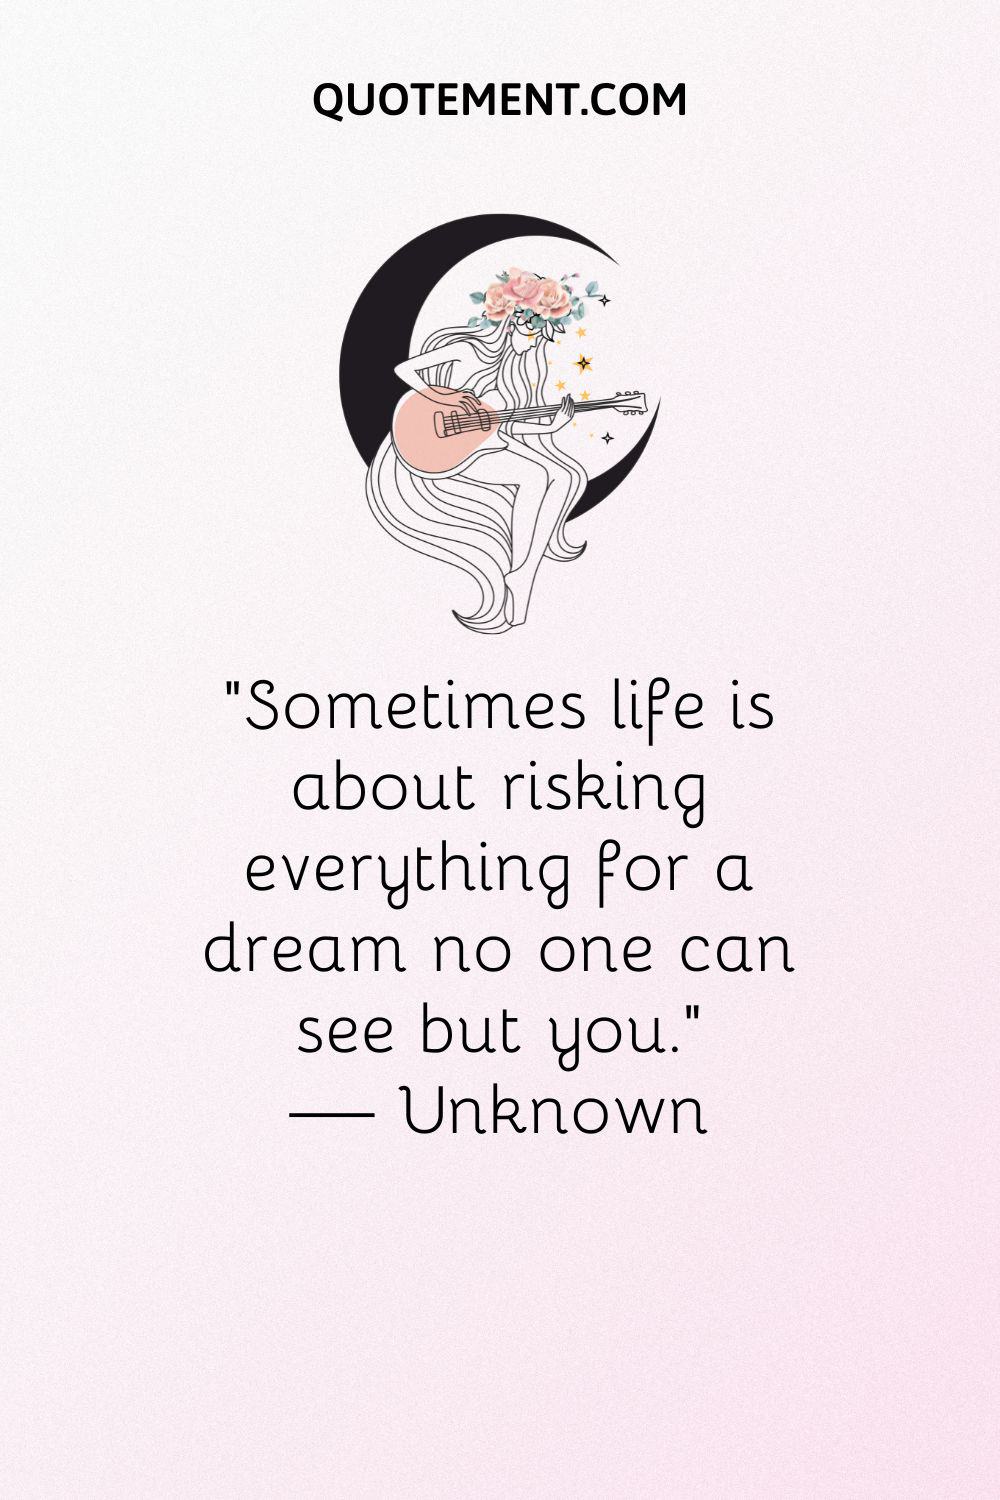 “Sometimes life is about risking everything for a dream no one can see but you.” — Unknown